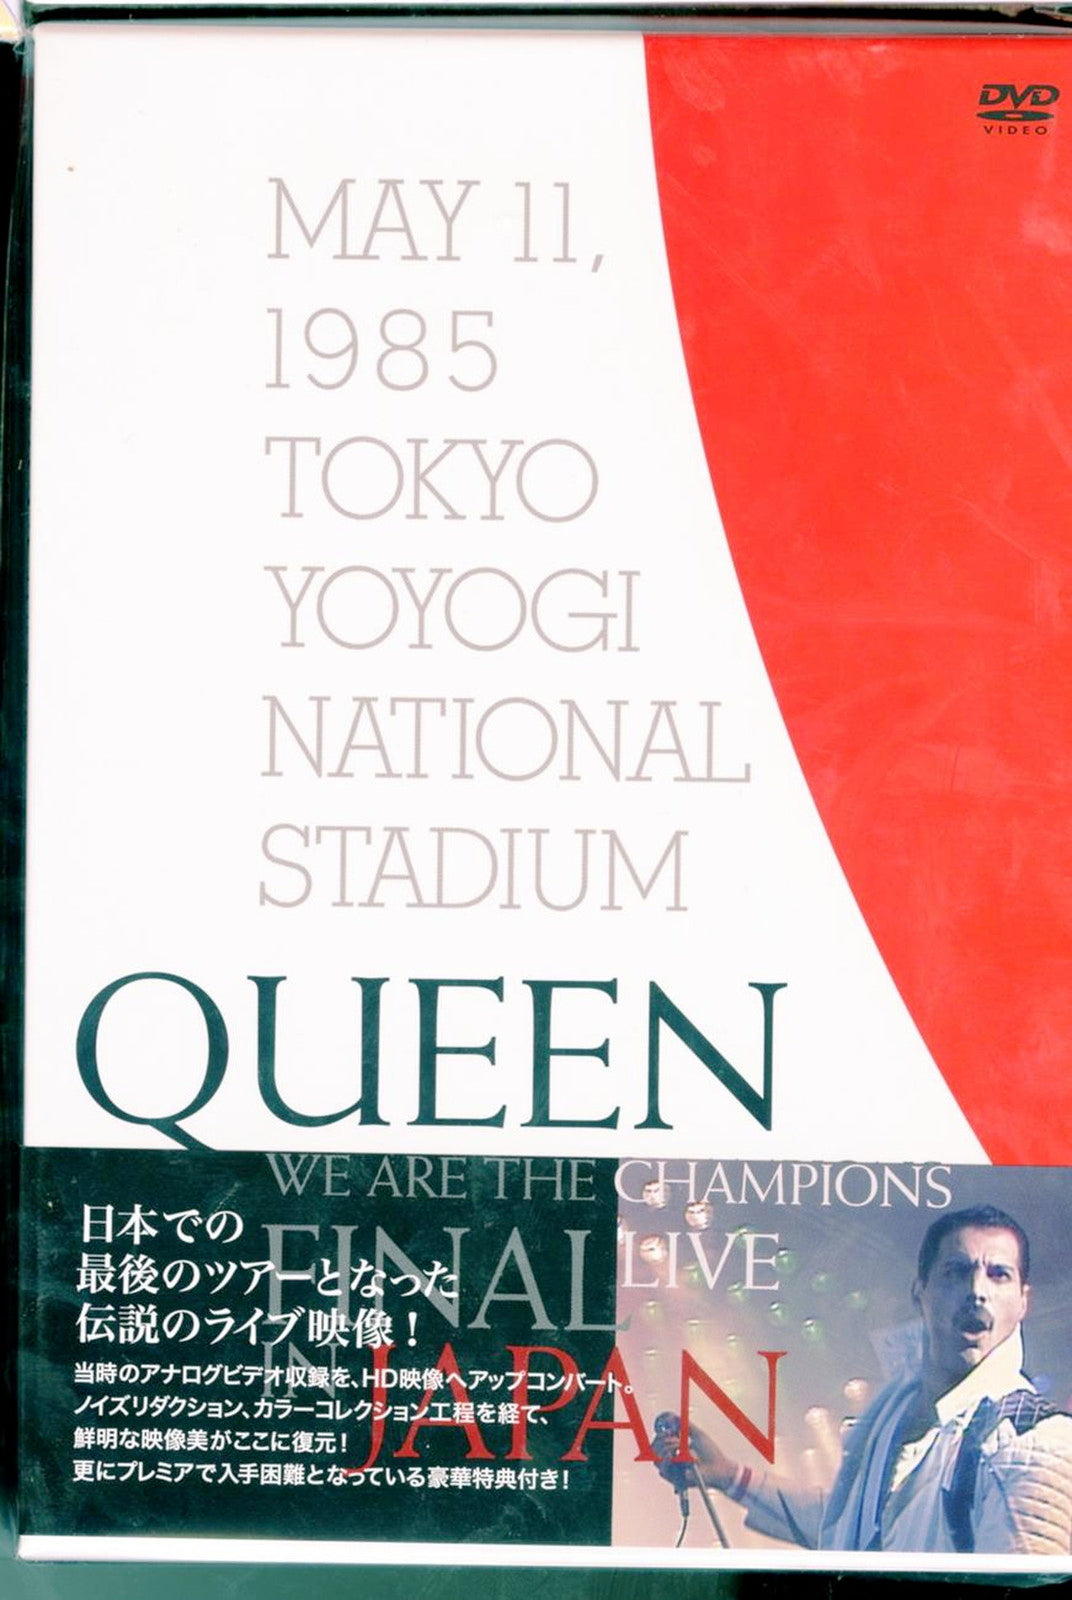 –　CDs　Vinyl　Live　Limited　Queen　In　The　Final　DVD+Book　Store　We　Japan　Are　Champions　Ed　Japan